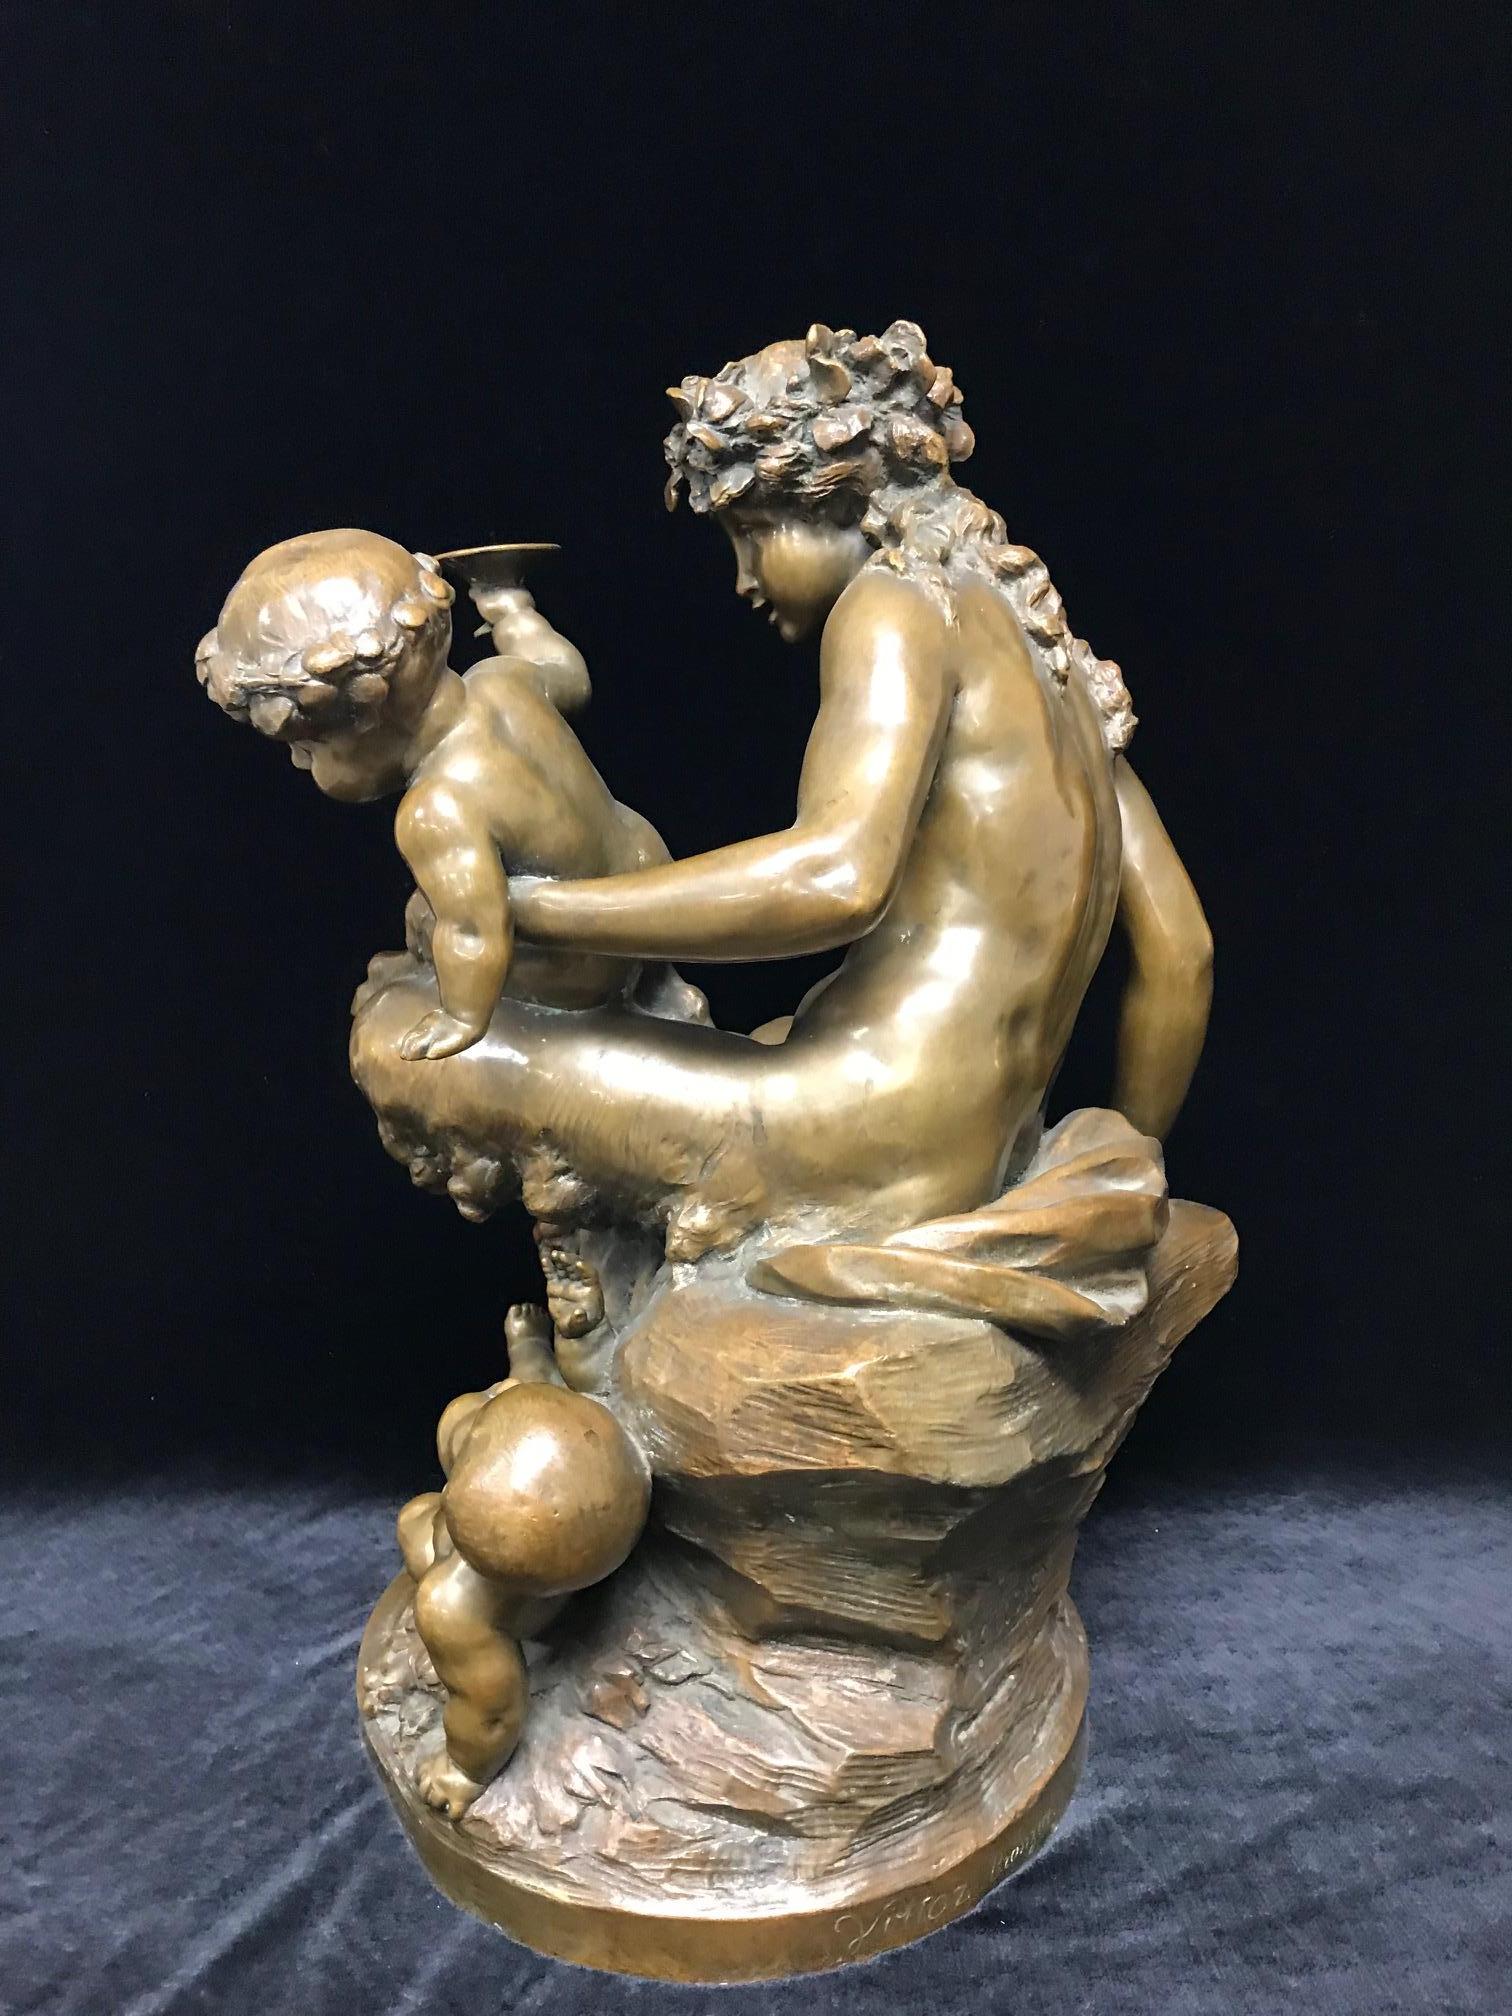 Nude faun woman sitting on a rock and 2 puttis, after Clodion  - Rococo Sculpture by Claude Michel Clodion